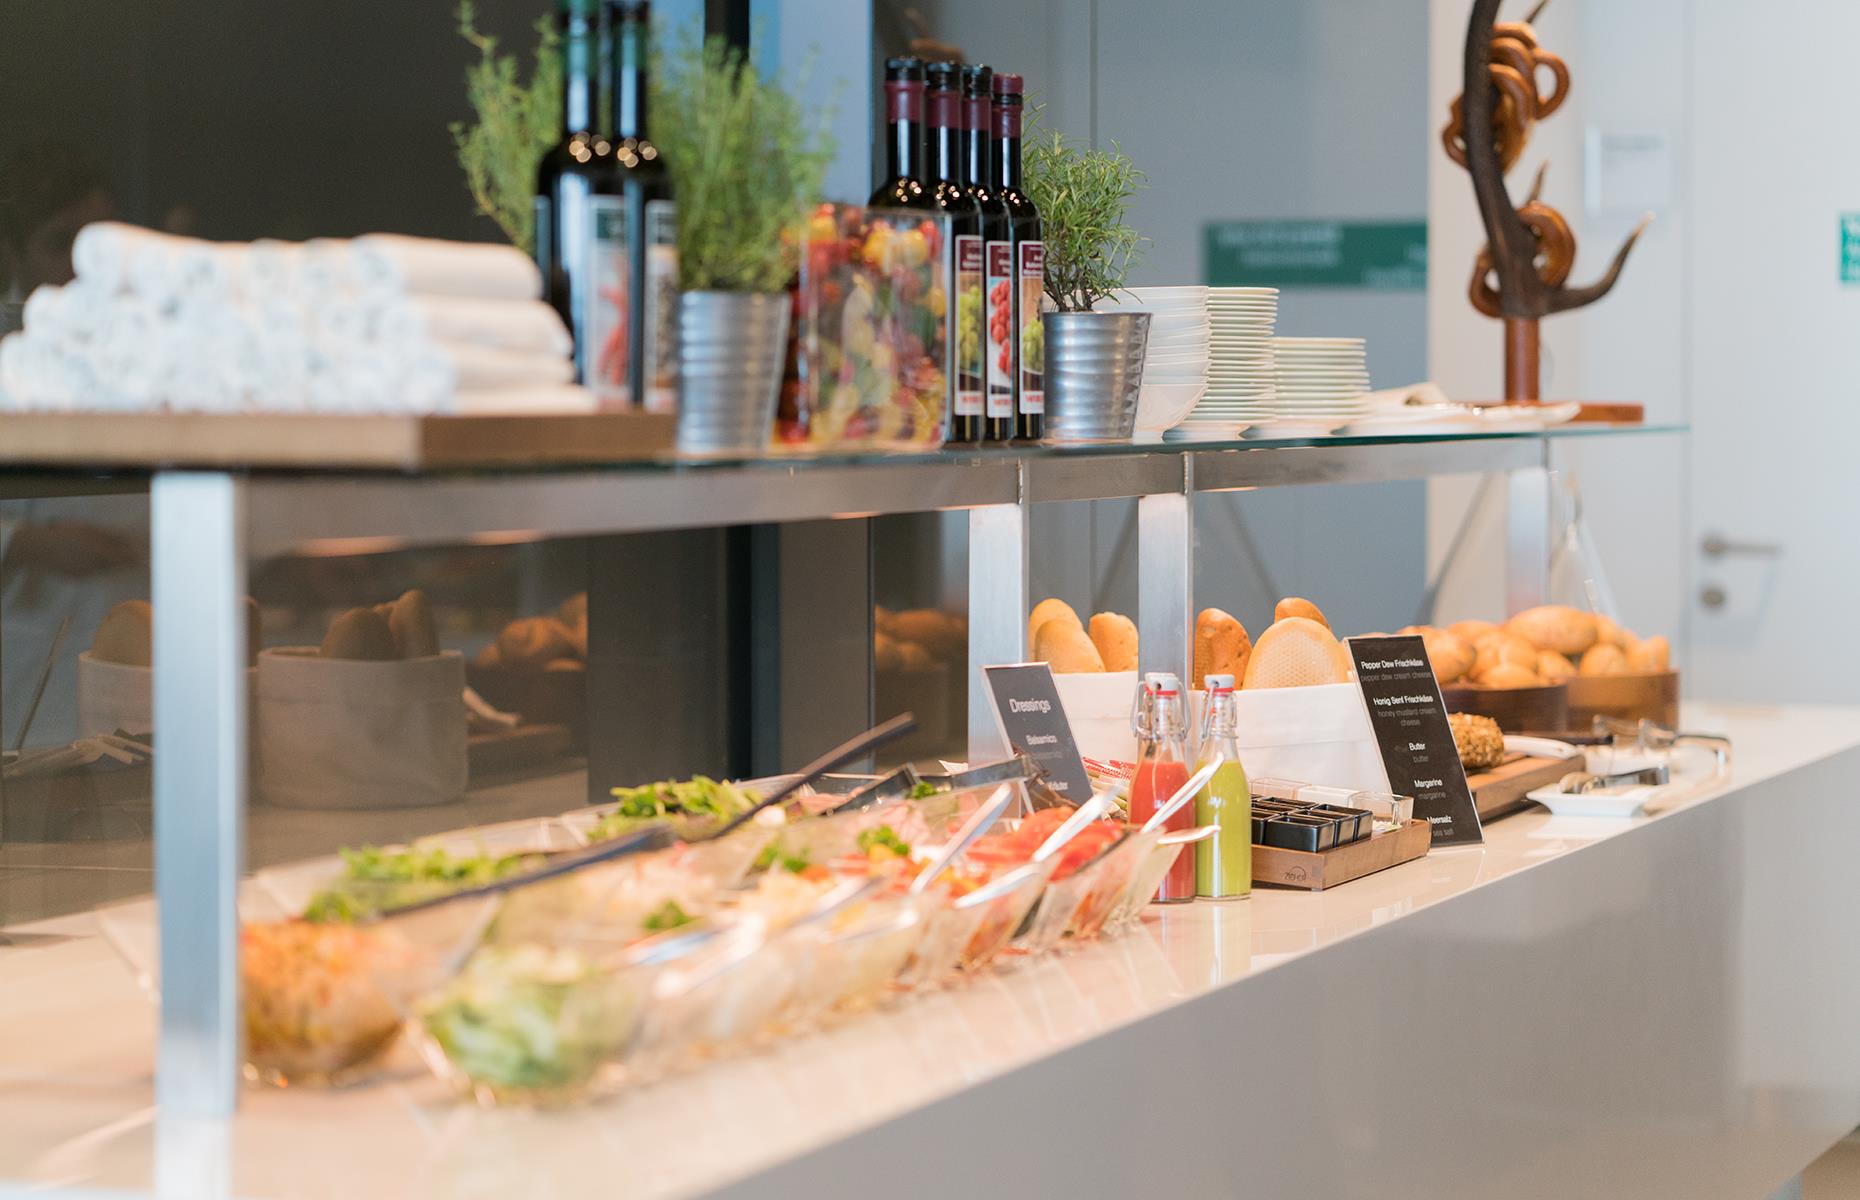 <p><a href="https://www.lufthansa.com/us/en/first-class-lounges">Lufthansa's First Class Lounge</a> is known for its exceptional food, with a range of hot and cold dishes, and à la carte dining returning in the near future. There's a lot to love about this place, with its private cubicles ideal for working in and fantastic views of planes taking off.</p>